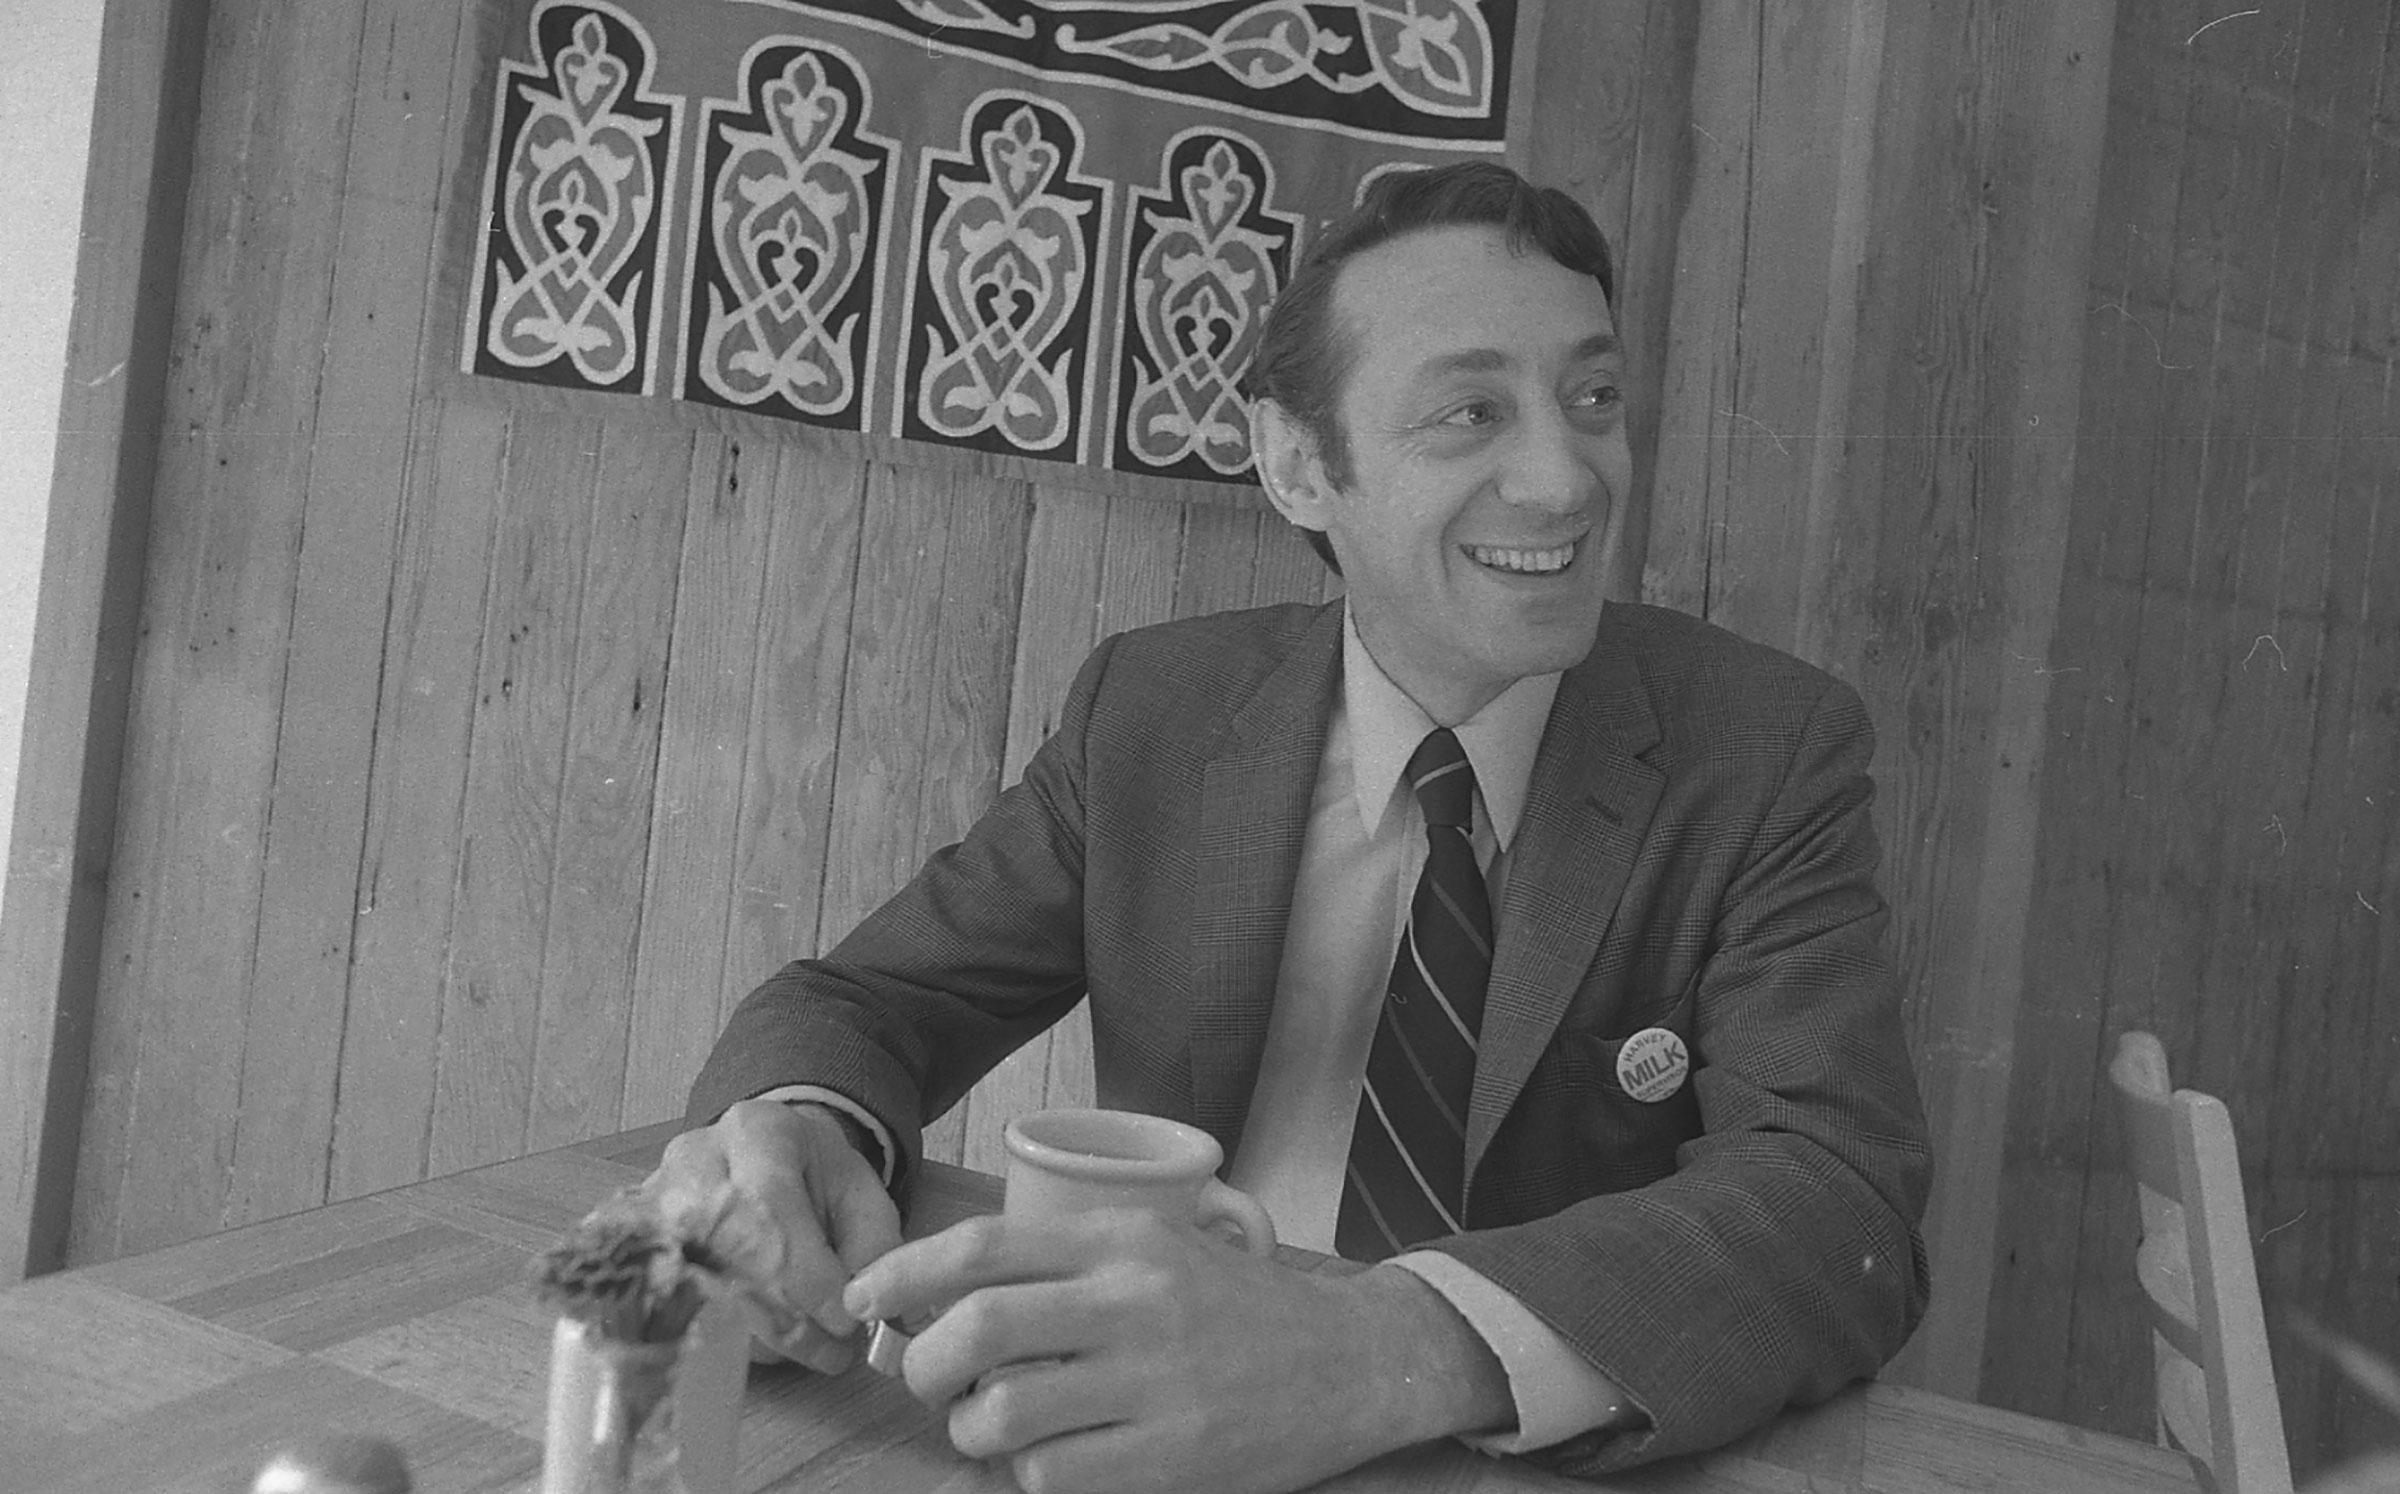 Harvey Milk during his campaign for S.F. Supervisor in 1975.